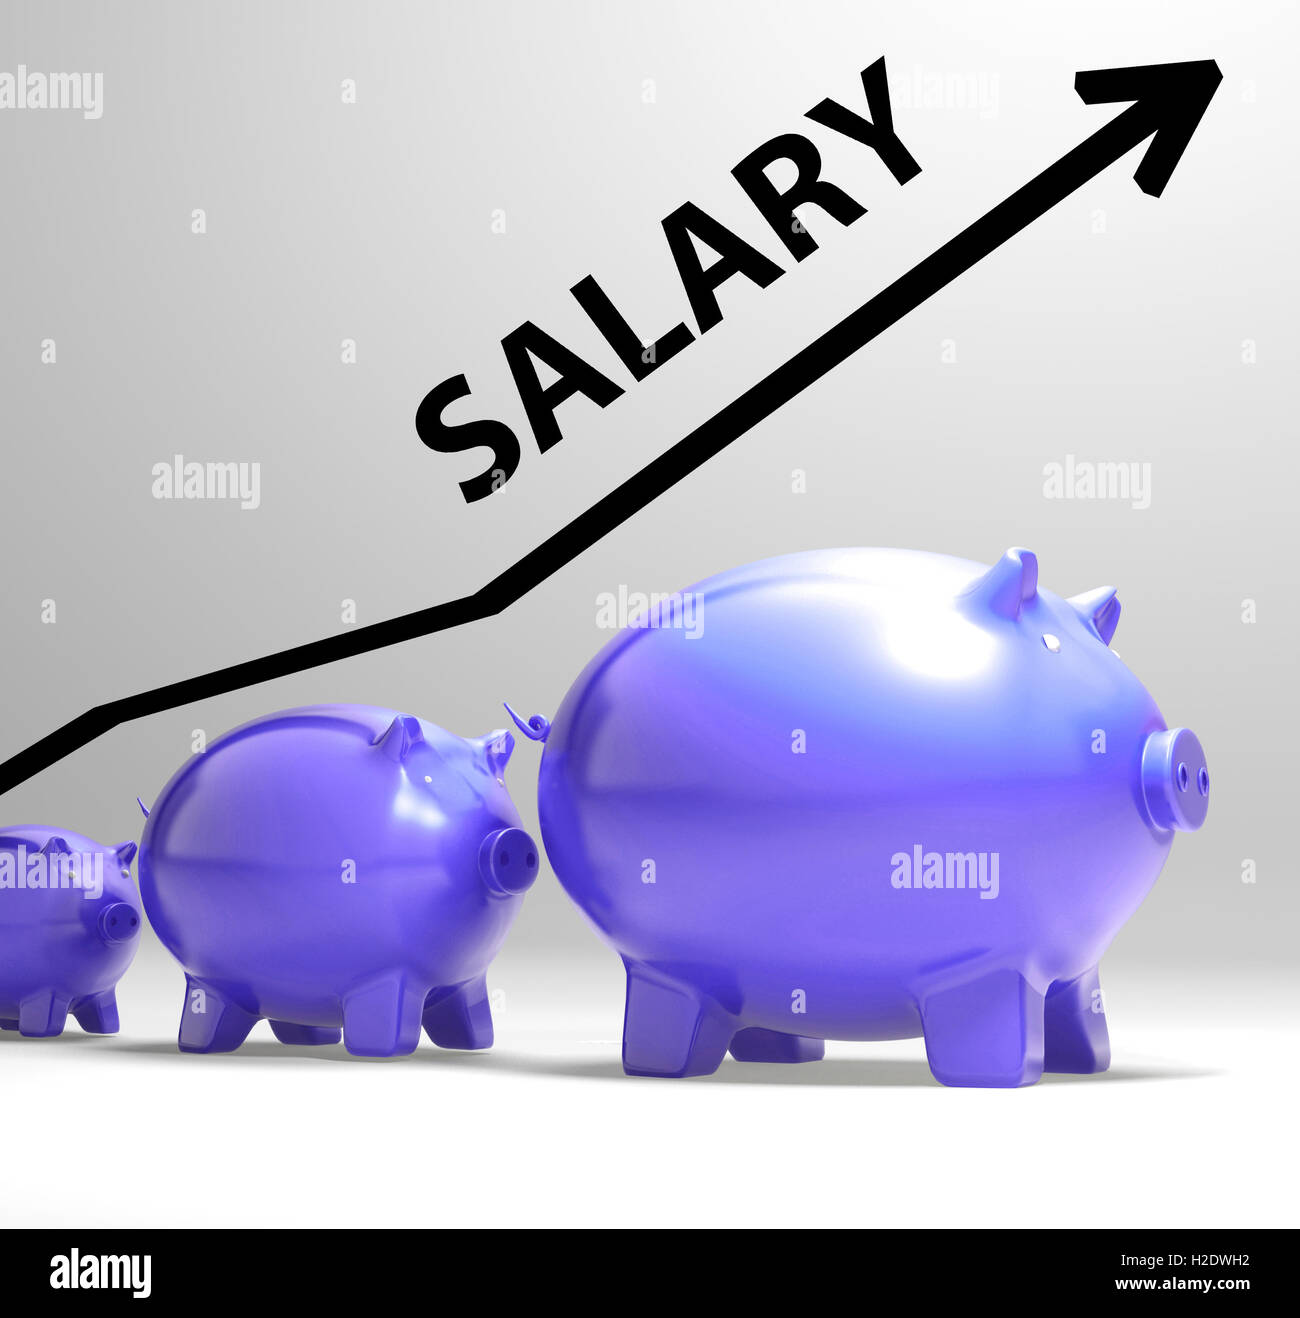 Salary Arrow Shows Pay Rise For Workers Stock Photo